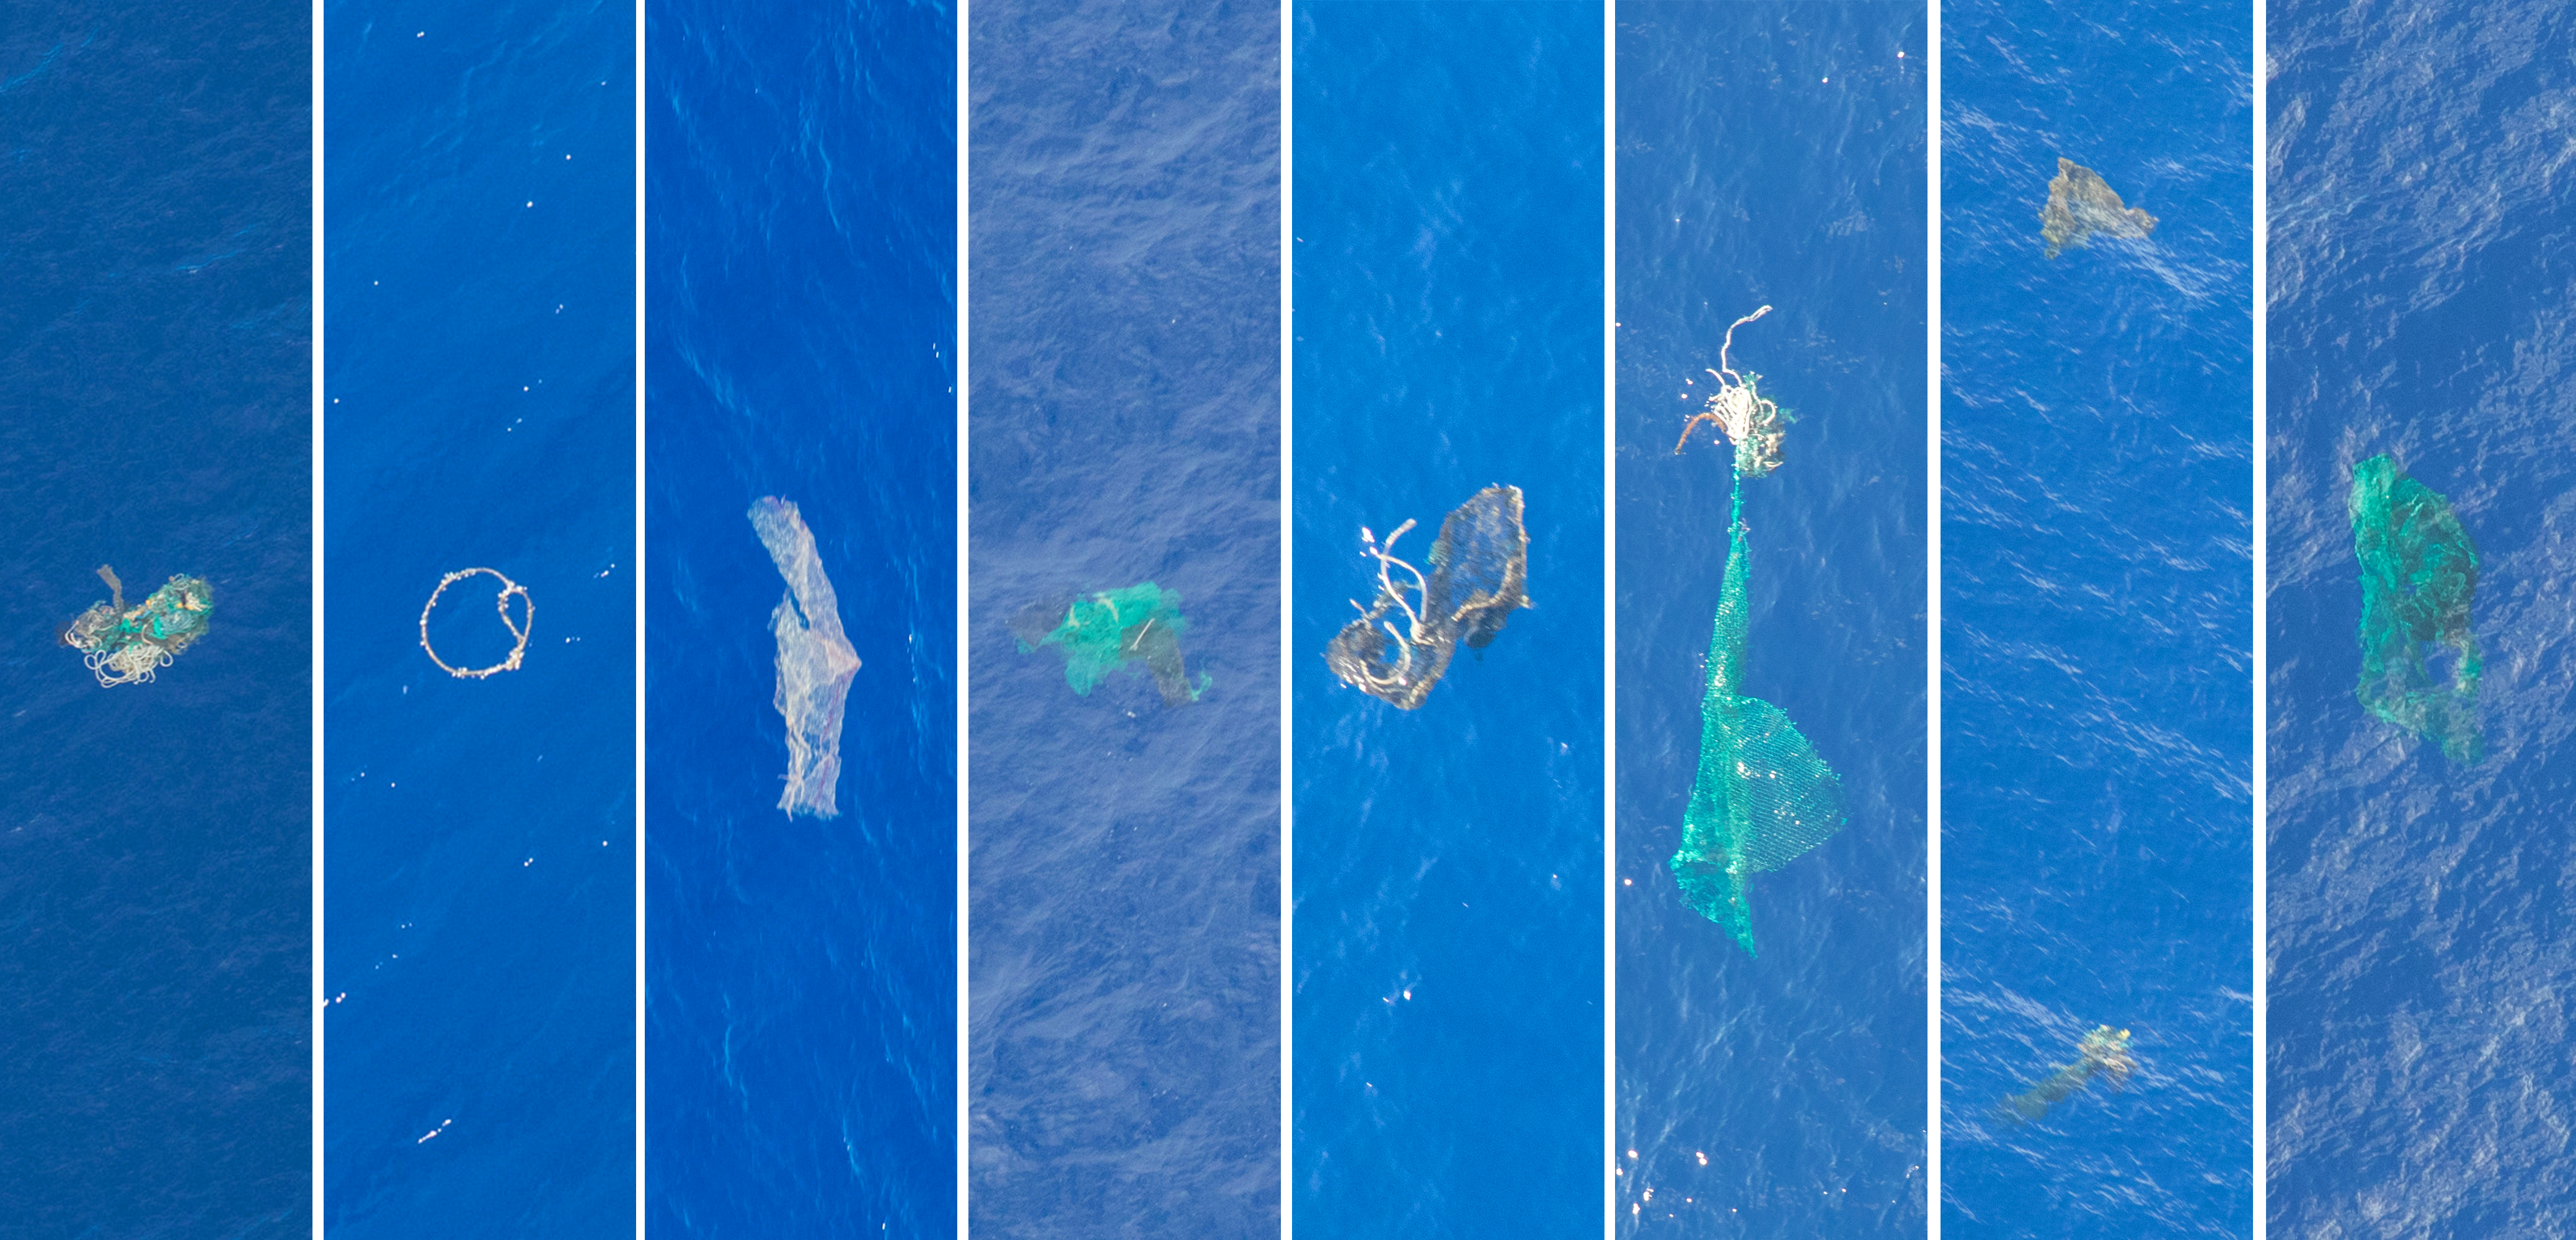 A selection of large objects observed in the Great Pacific Garbage Patch during the Aerial Expedition